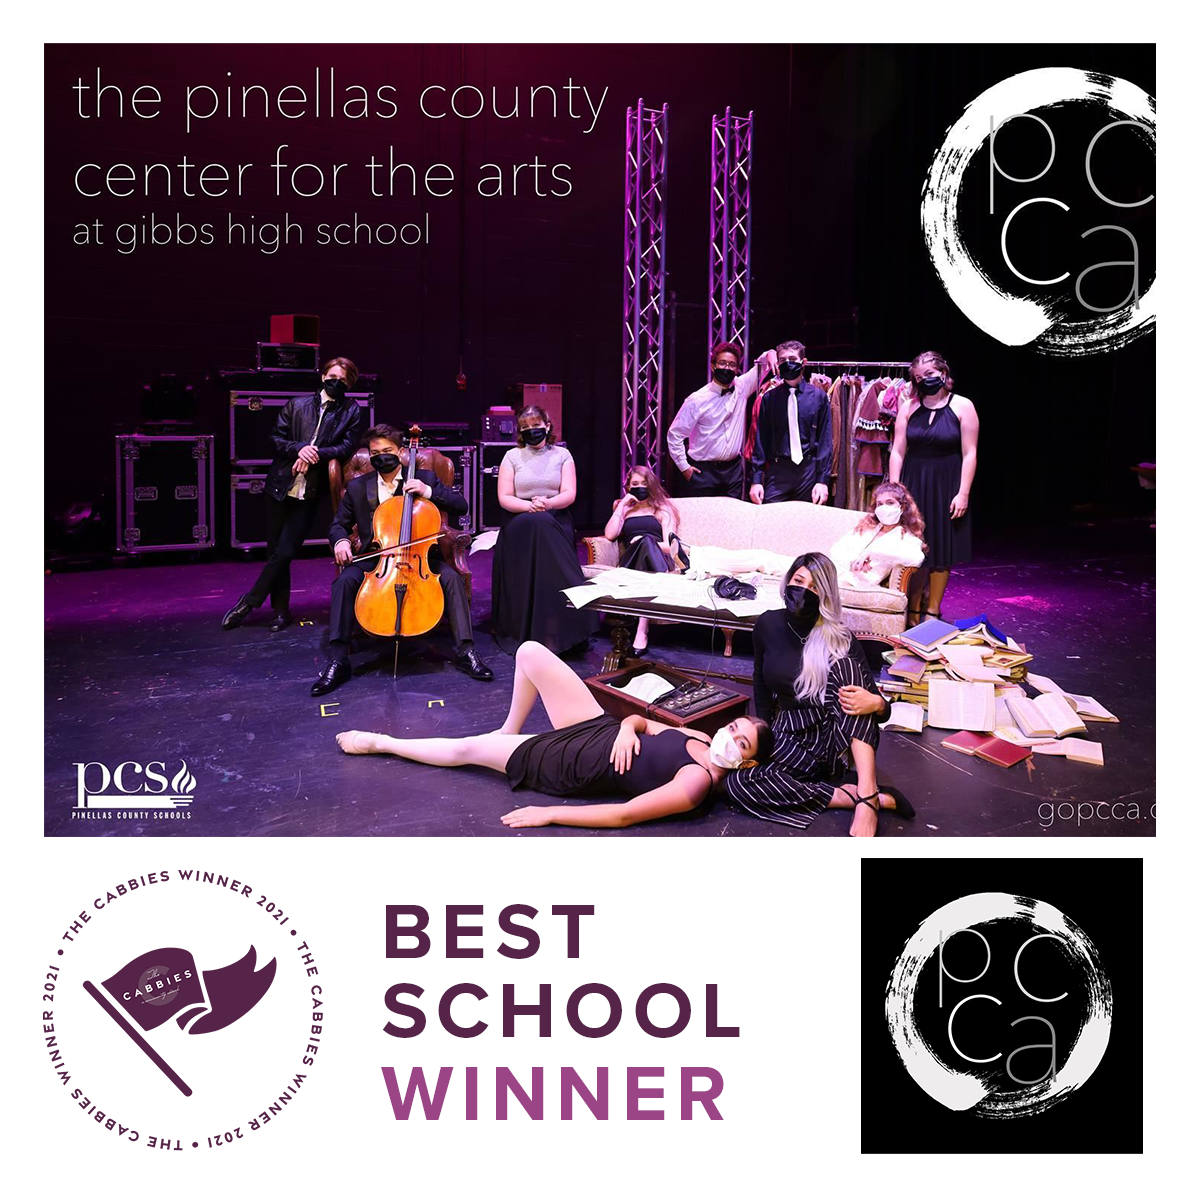 best school winner - Pinellas County Center for the Arts at Gibbs High School